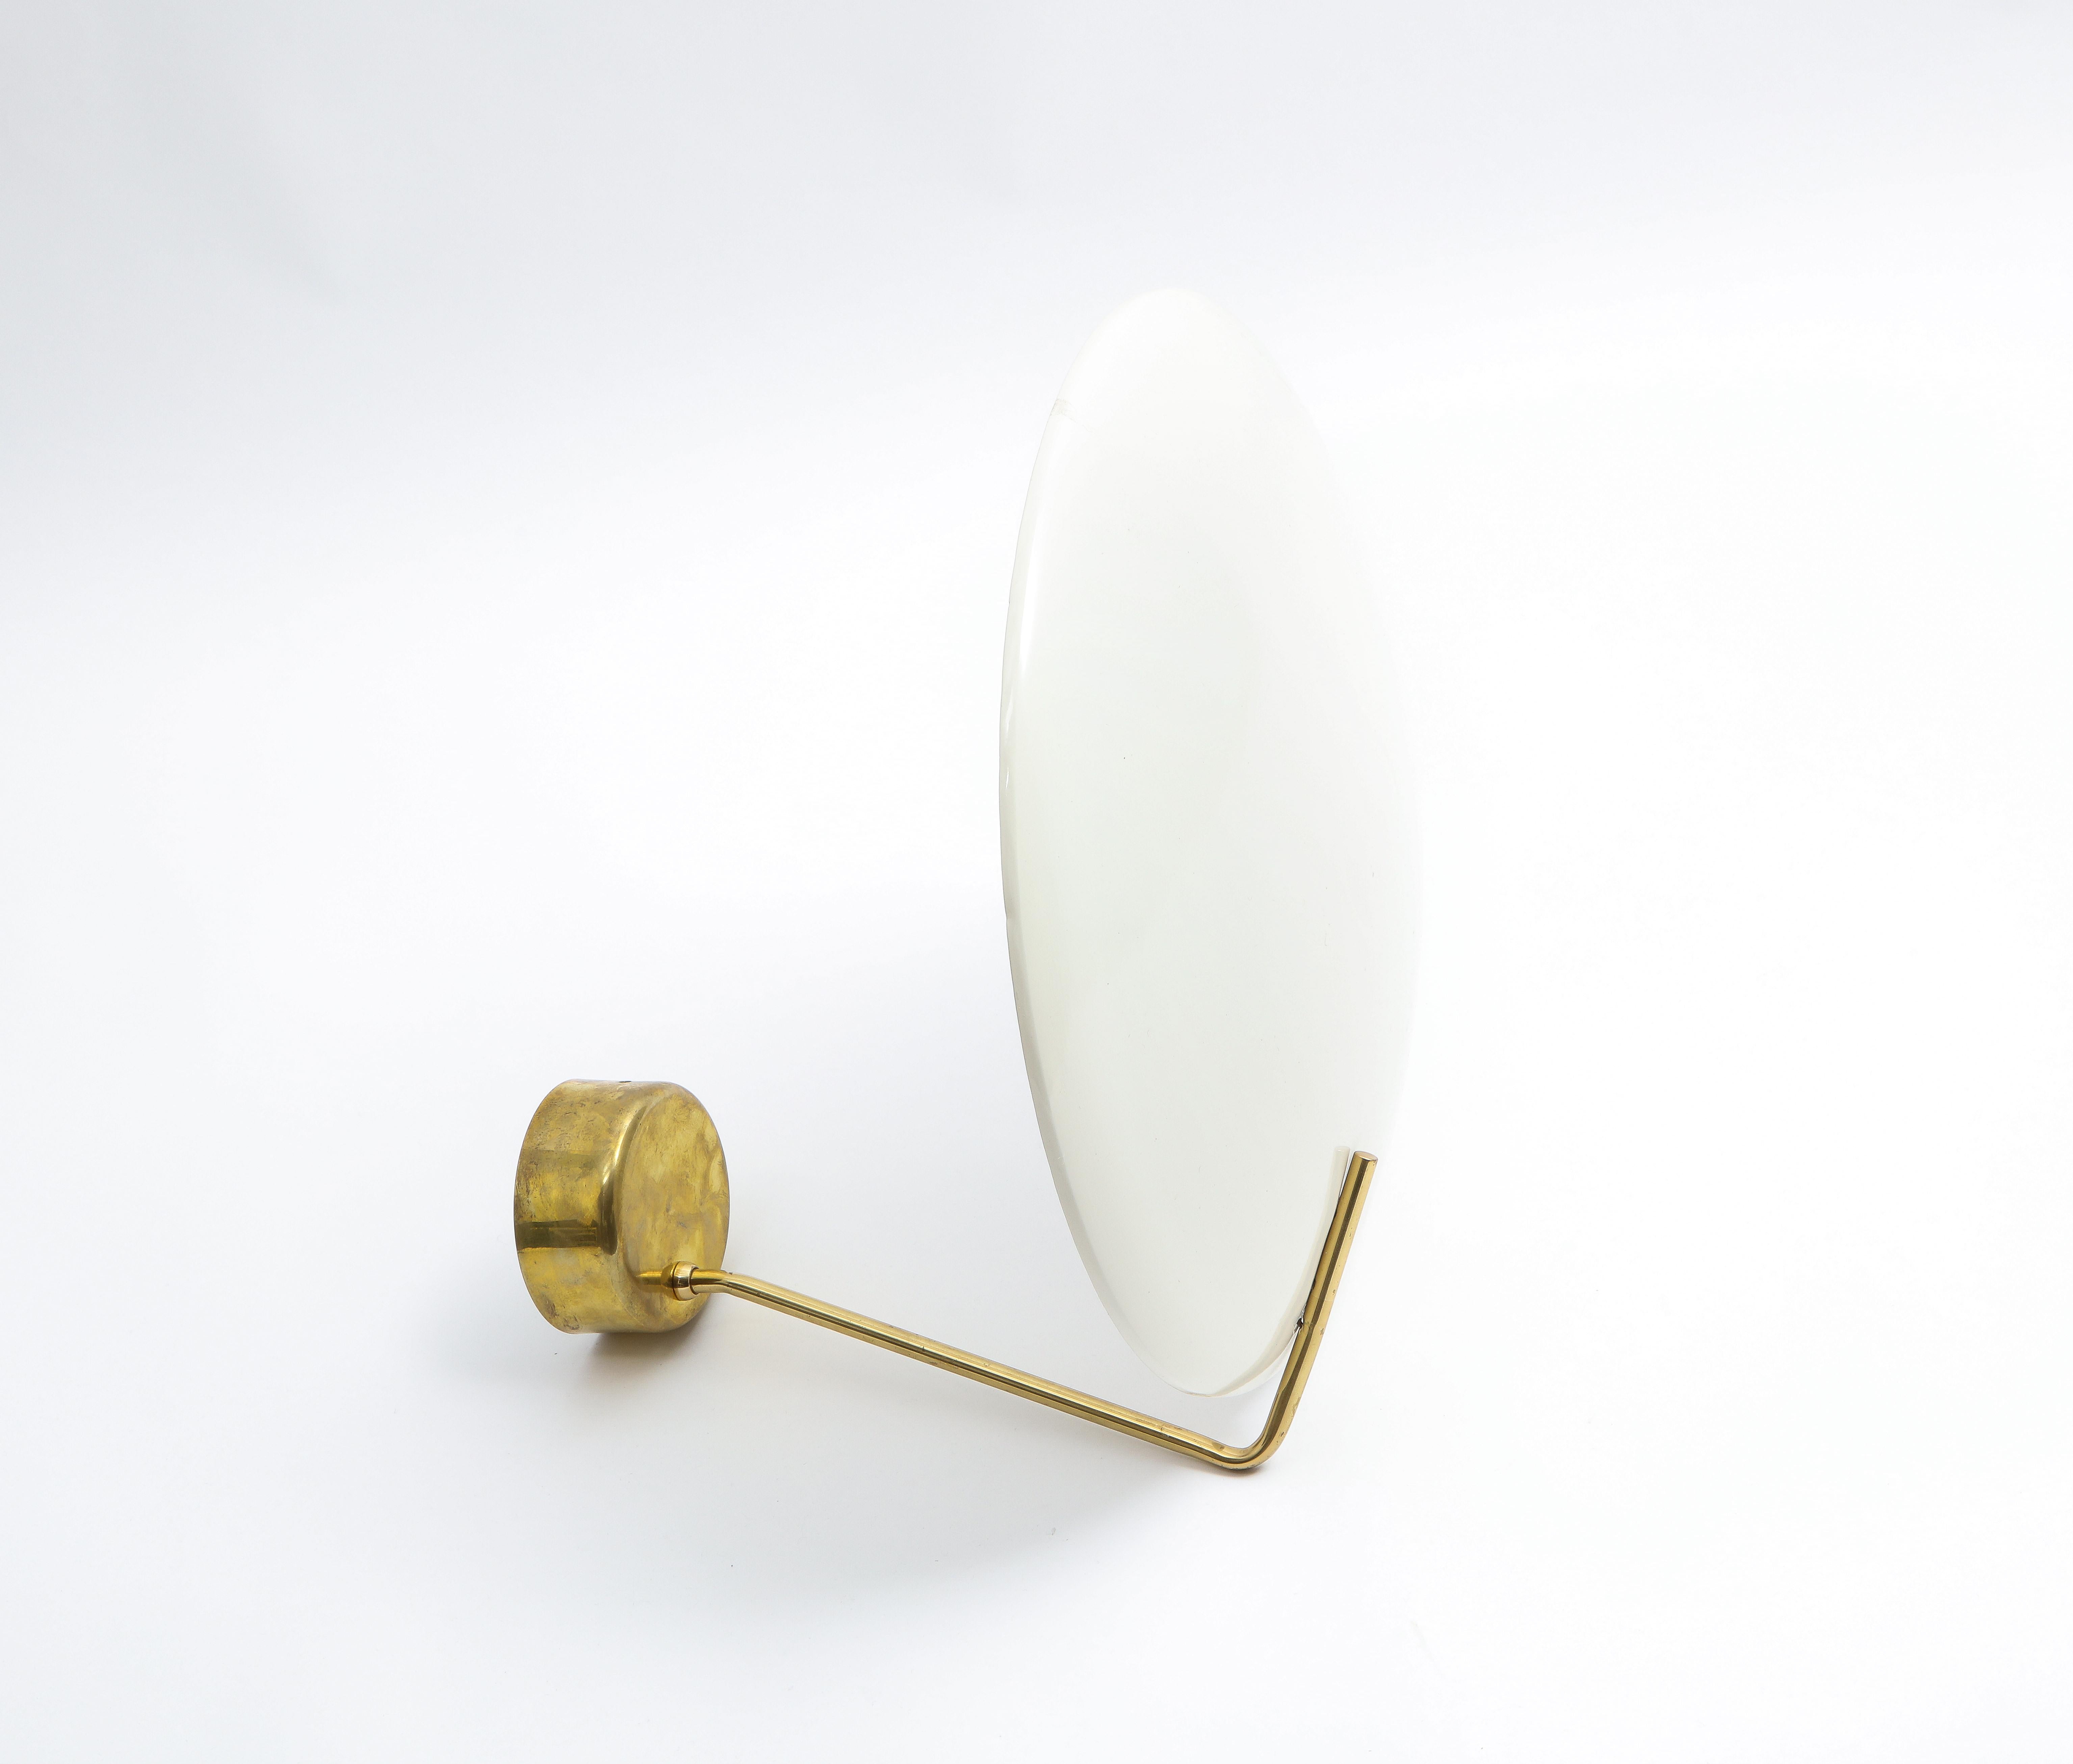 Roberto Matta Sconces / Ceiling Lights for Arredoluce, Italy, 1960s In Good Condition For Sale In New York, NY